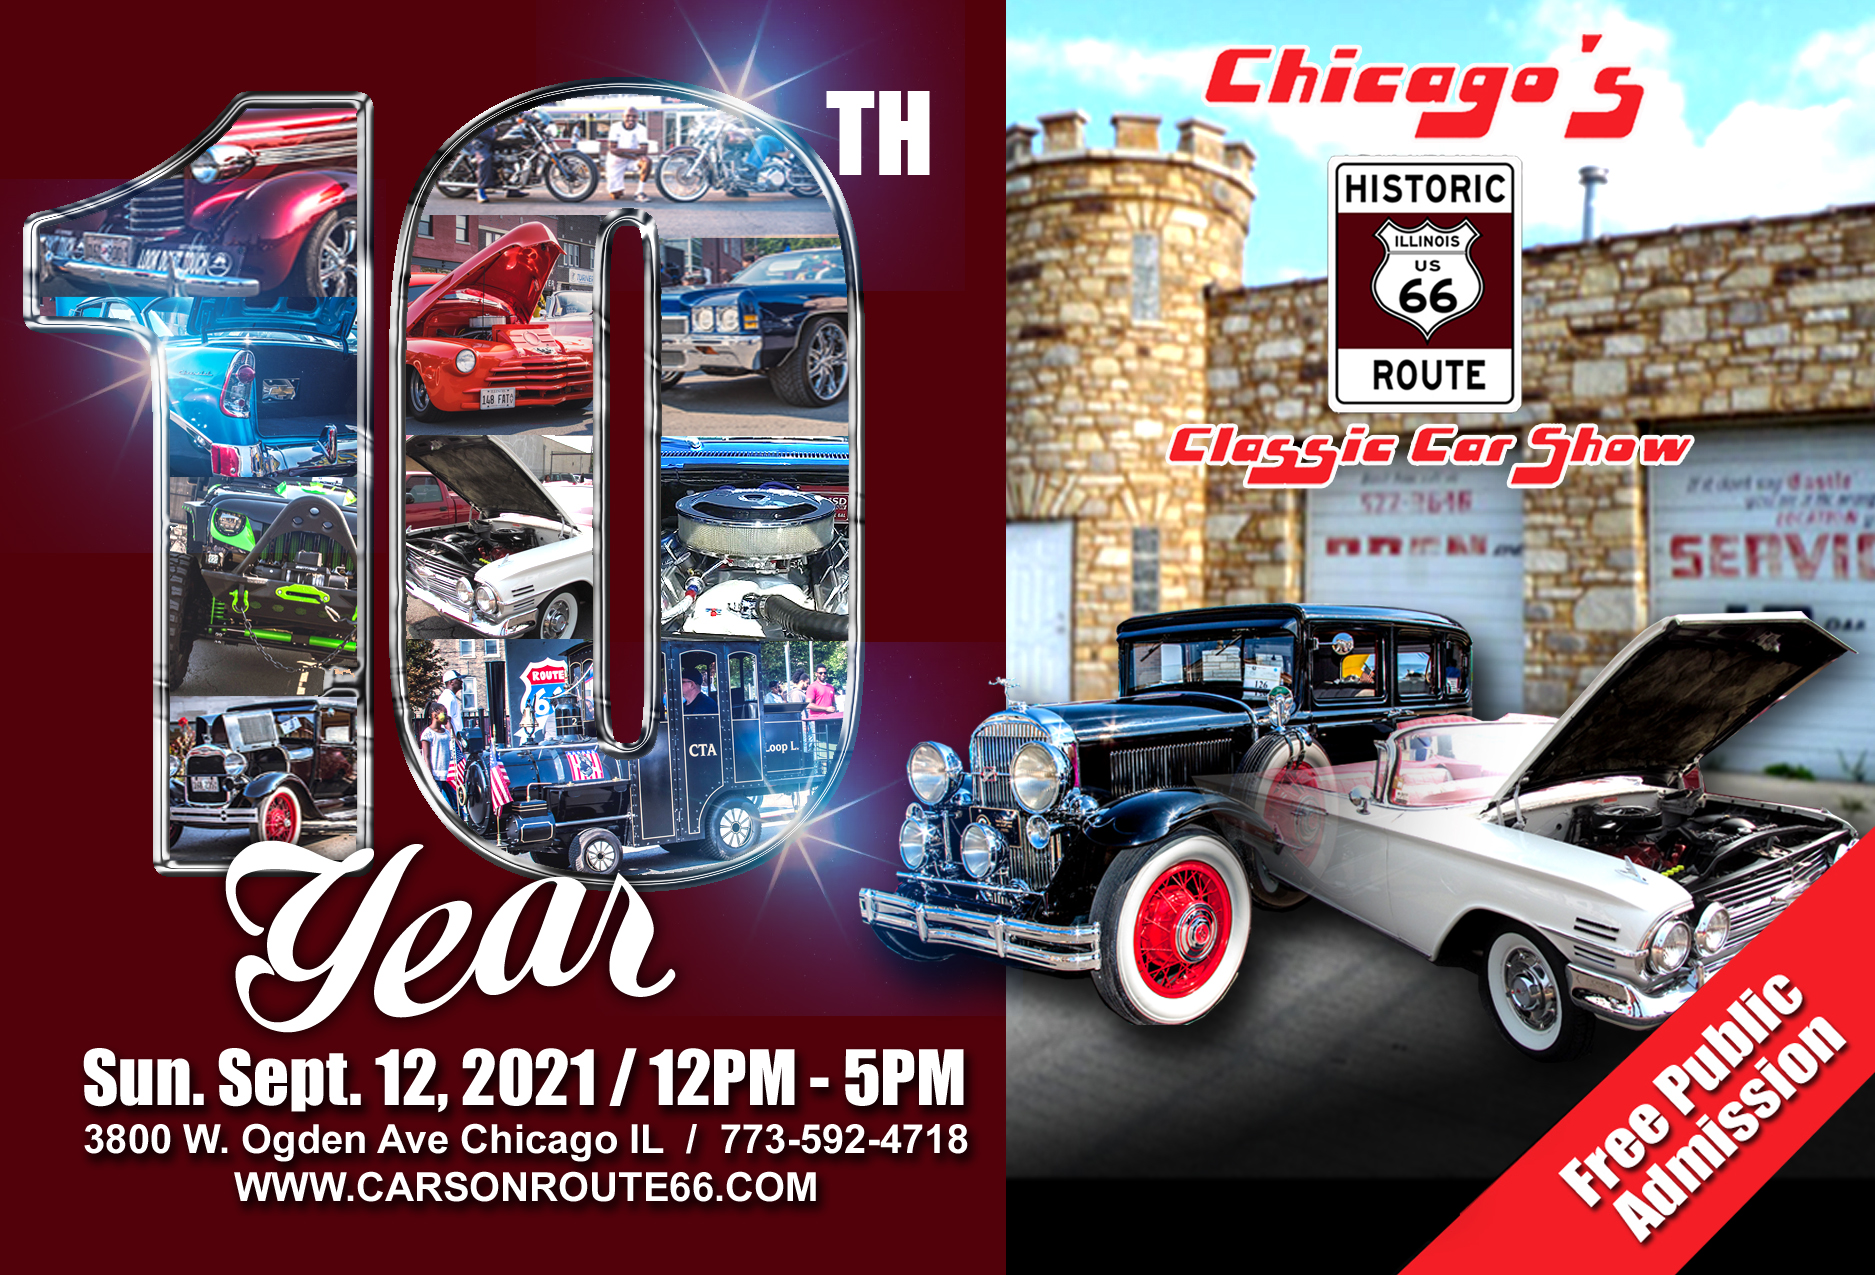 20212022 Car show flyers from around the United